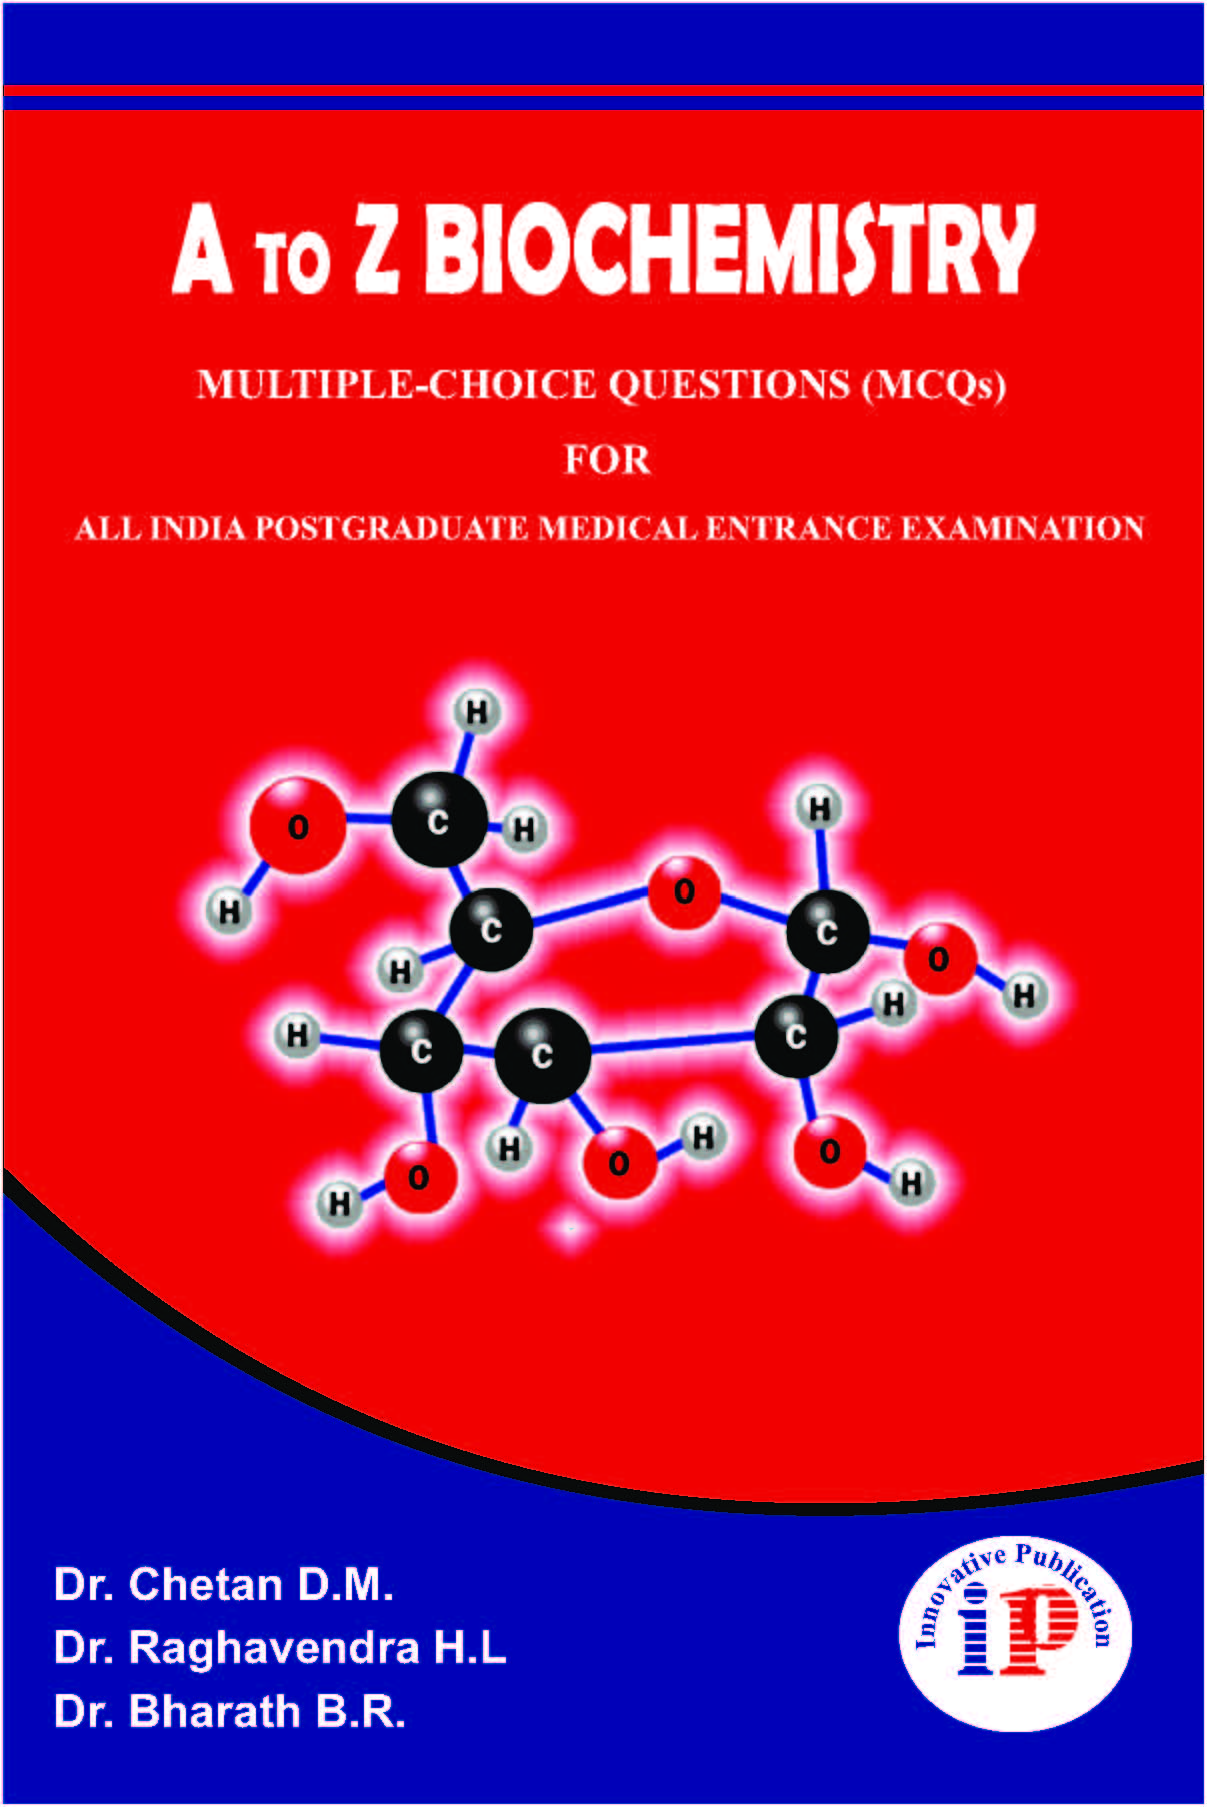 A To Z Biochemistry Mcq For All India Postgraduate Medical Entrance Examination